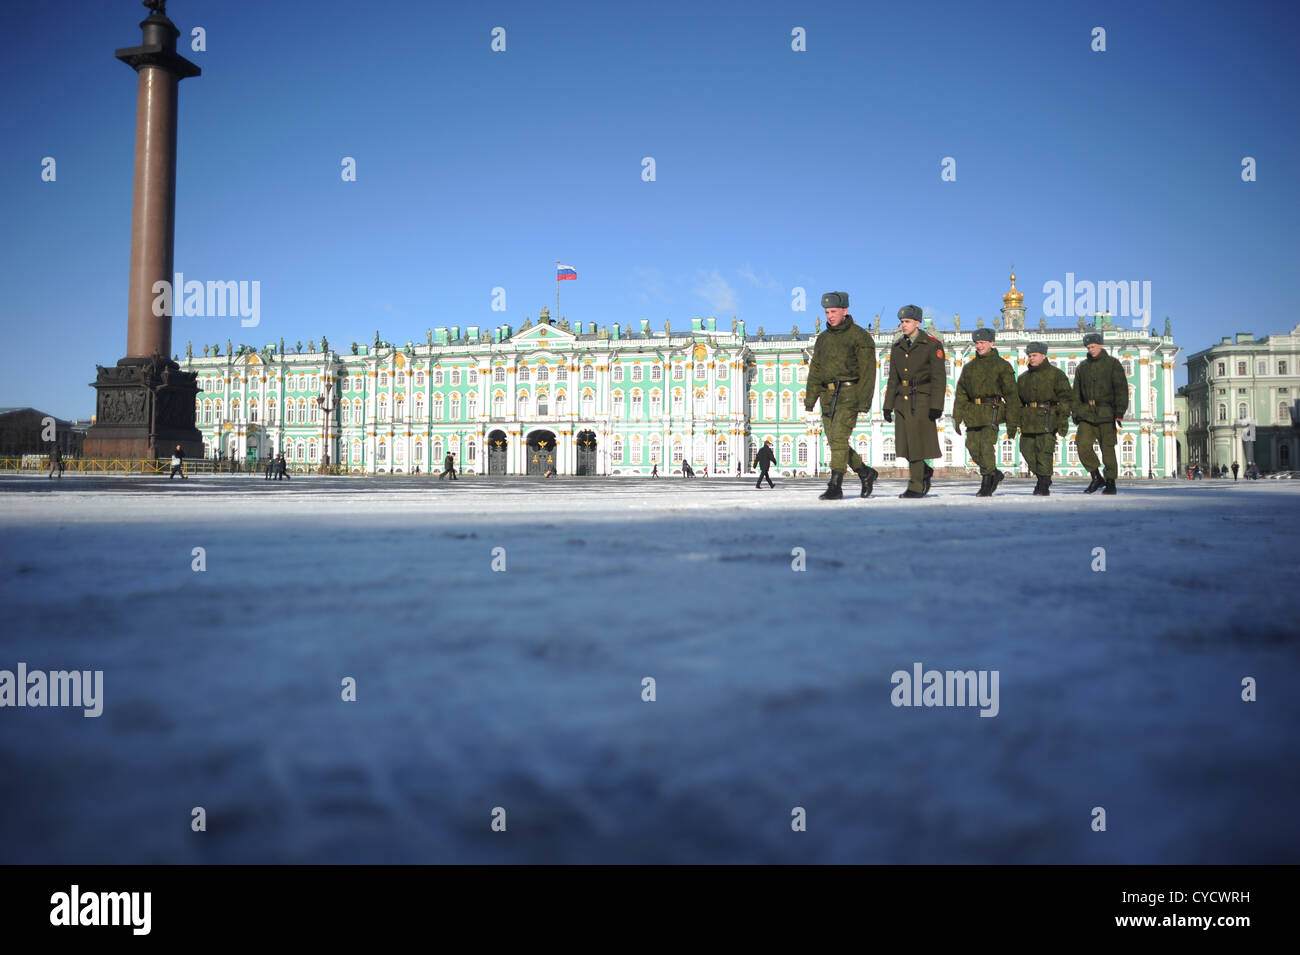 Russian soldiers marching in front of the Winter Palace in Saint-Petersburg, Russia Stock Photo